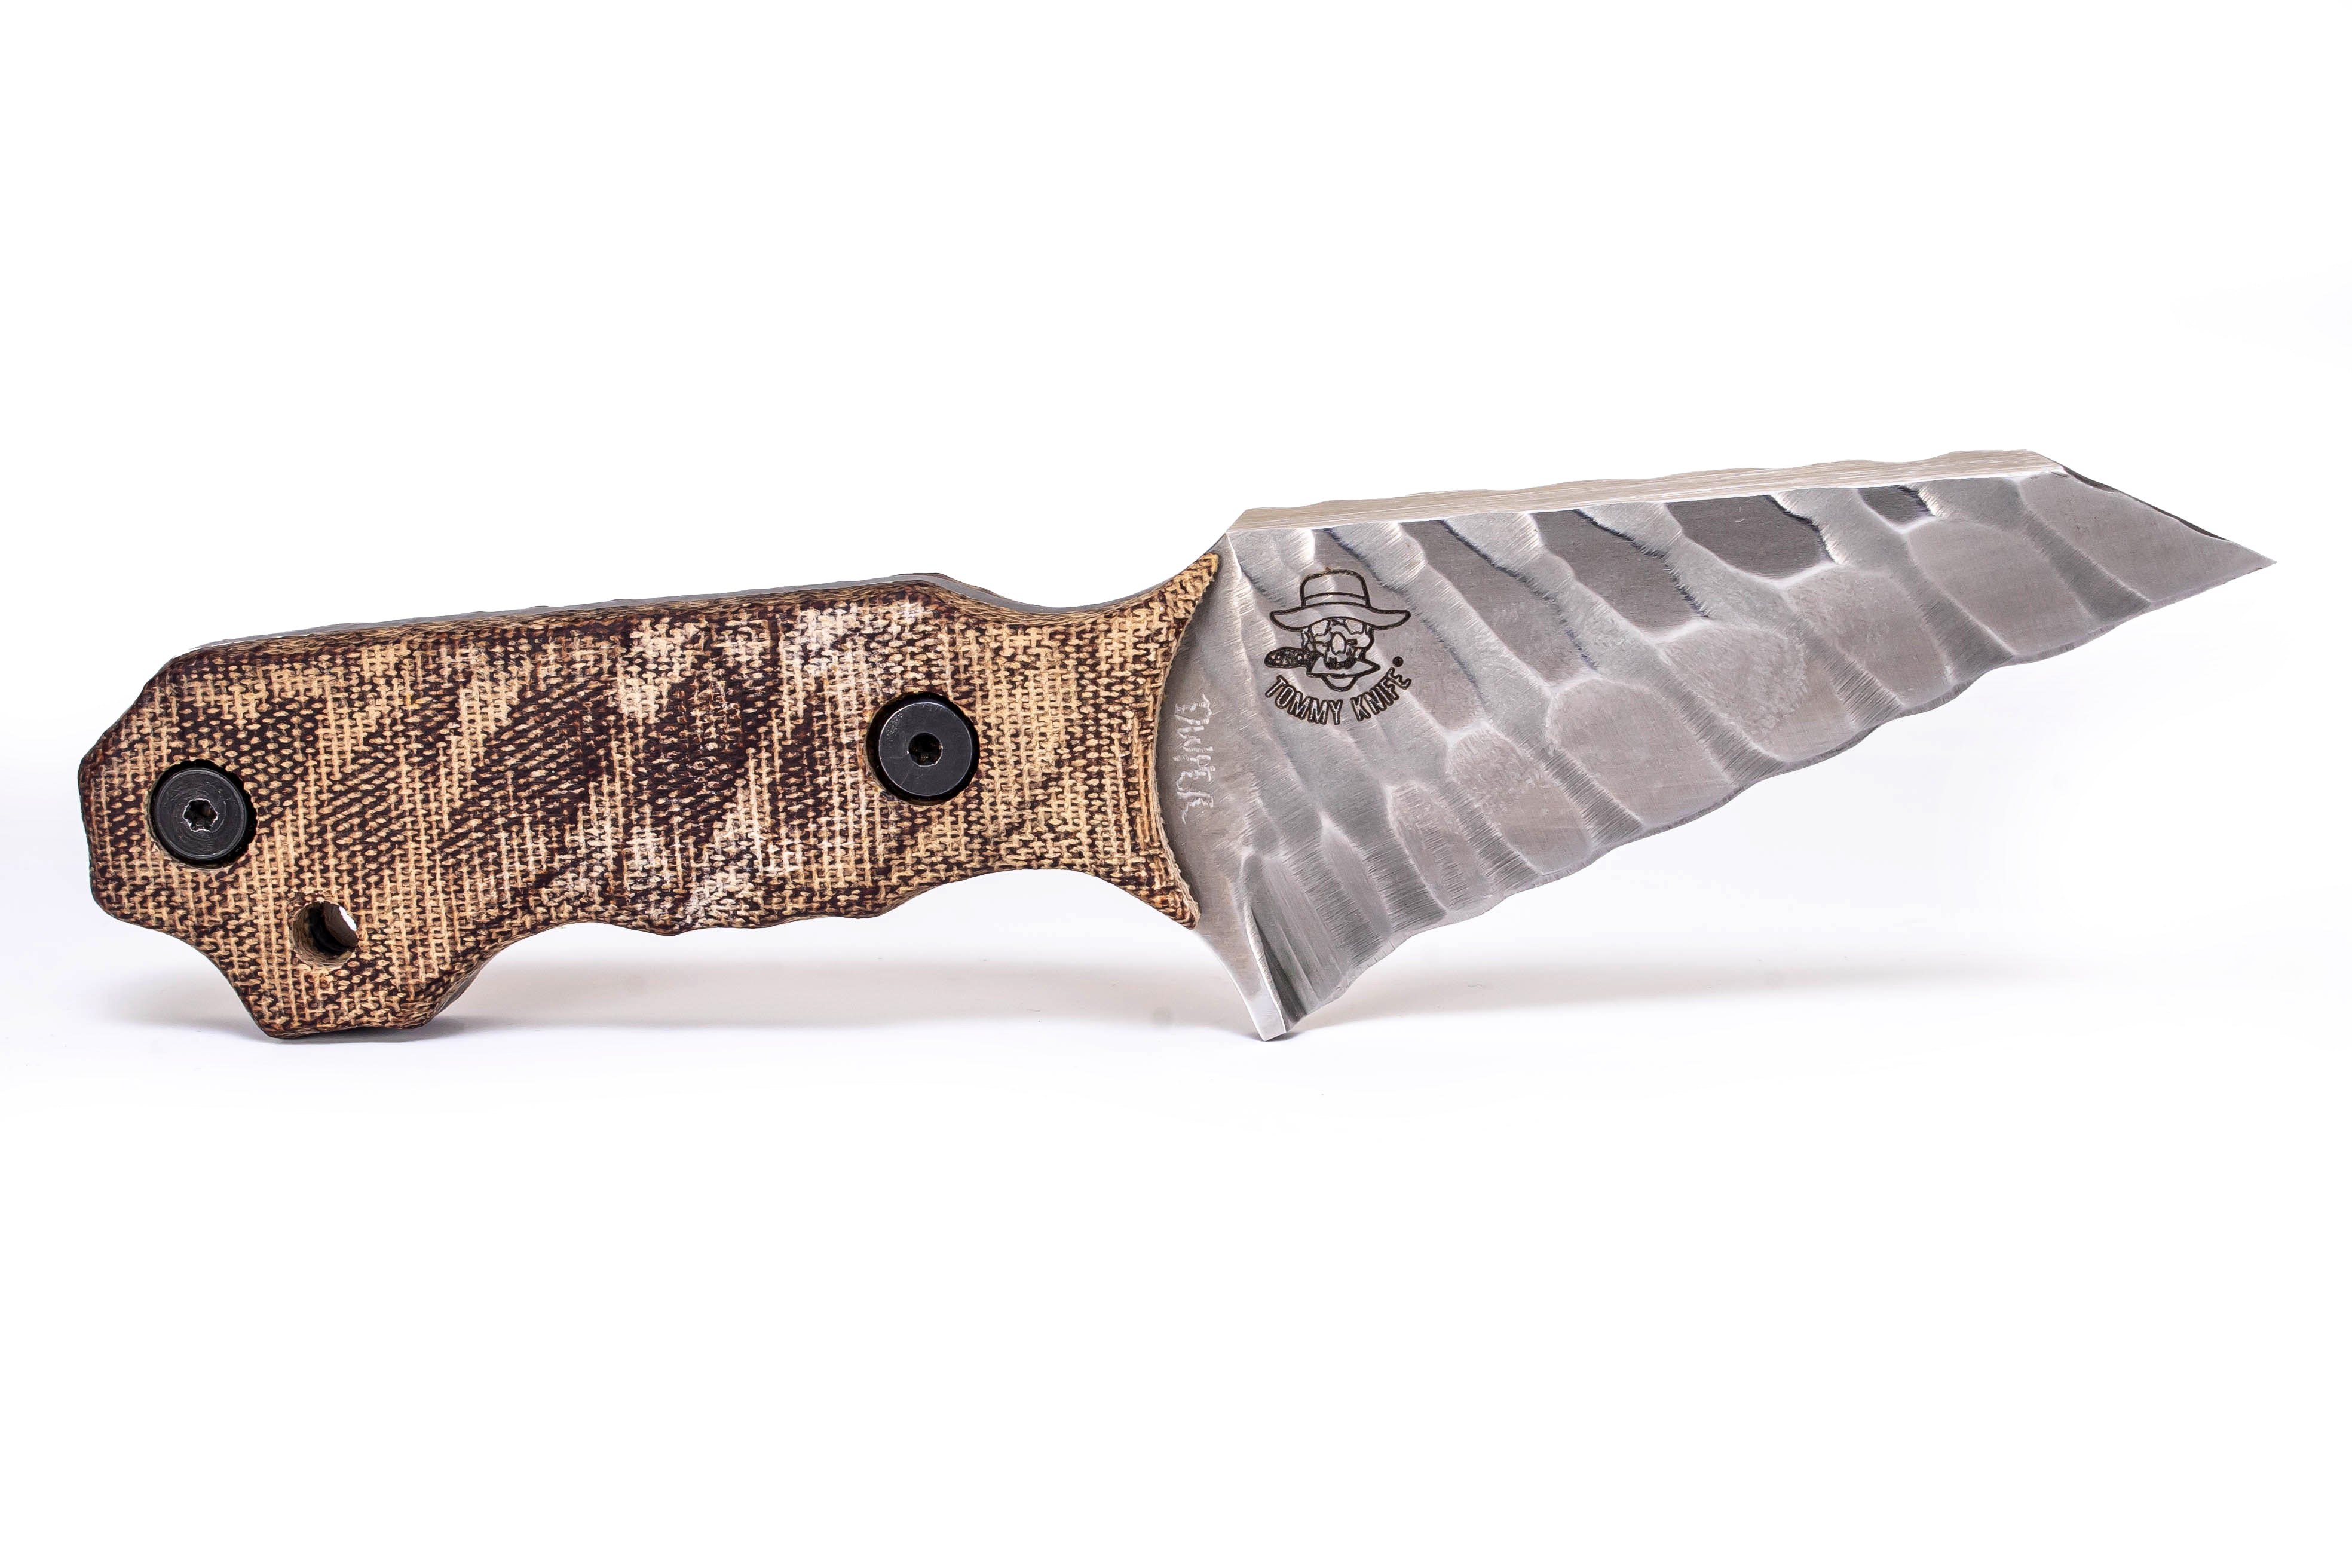 Tommy Knife® Golf - Sculpted Blade with Micarta Grip - Right Grind